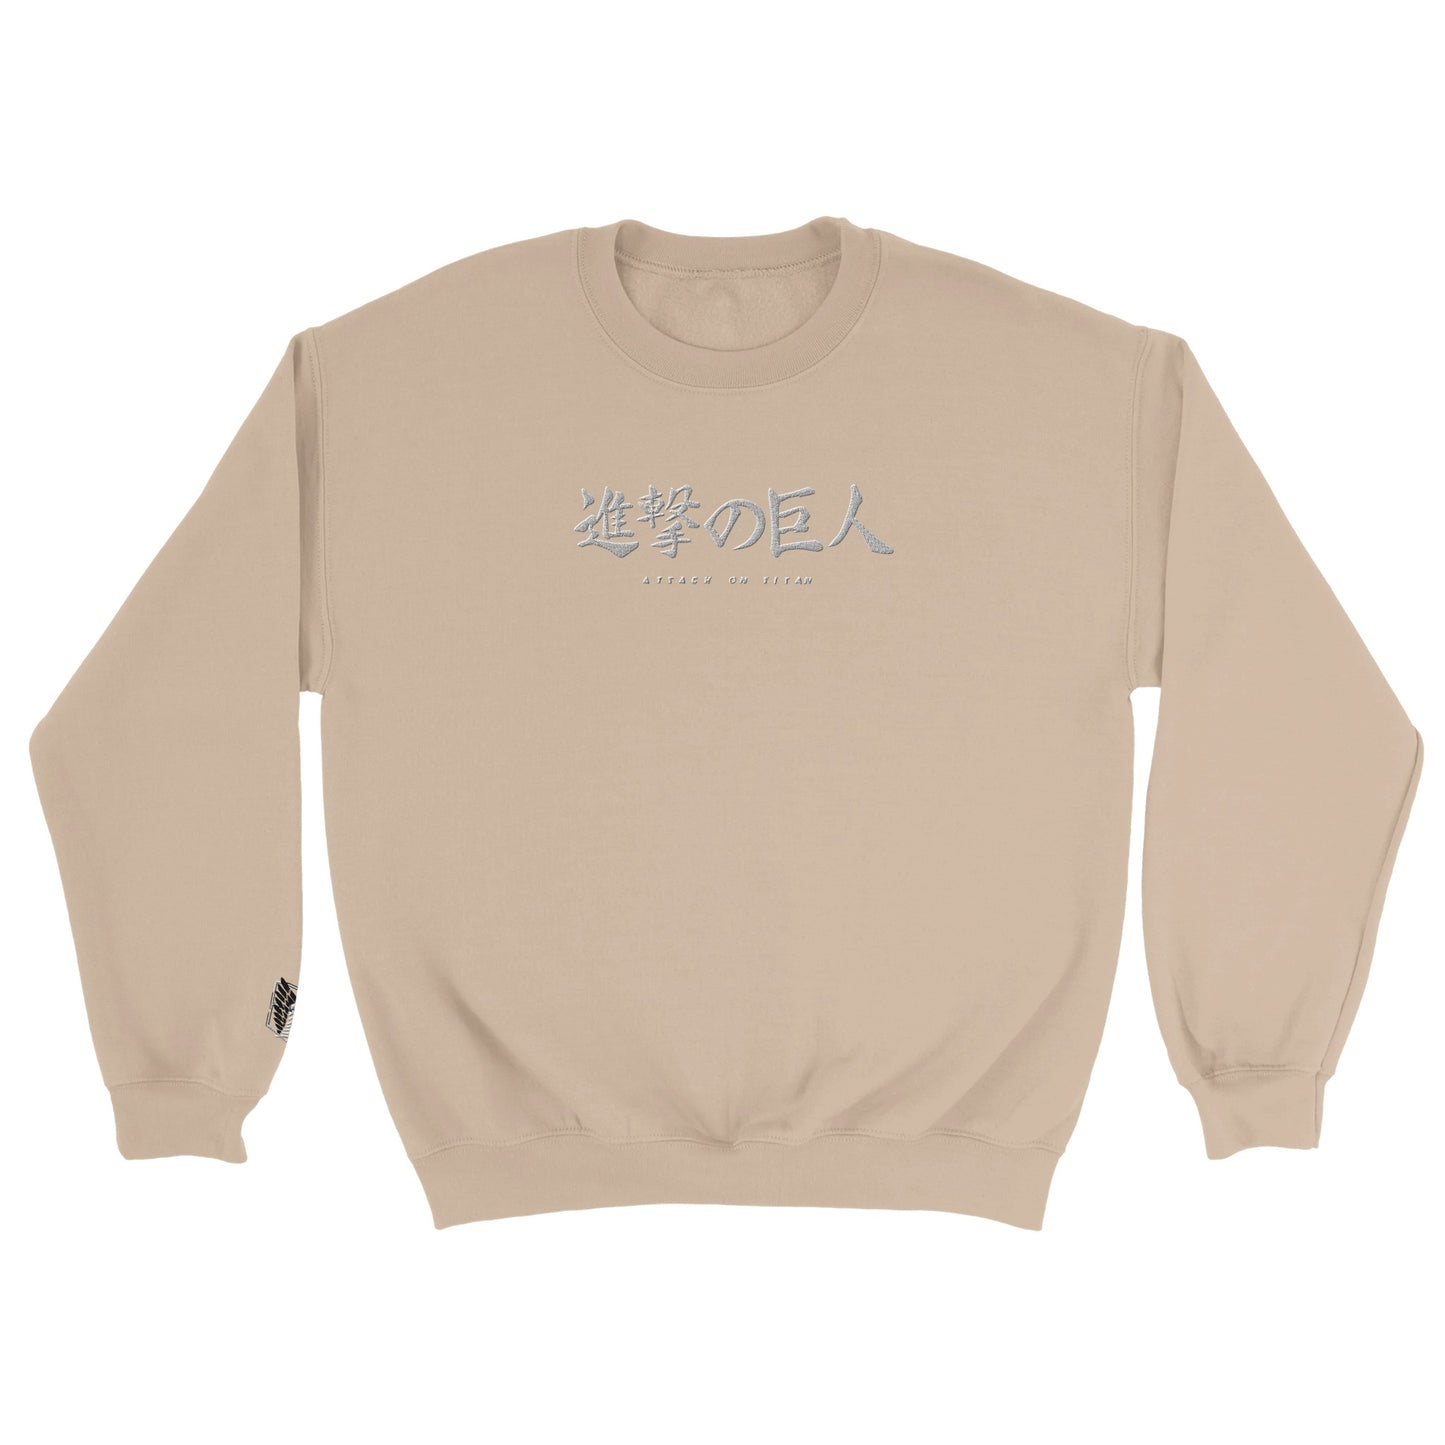 Attack on Titan - Wings of Freedom Classic Unisex Embroidered Crewneck Sweatshirt